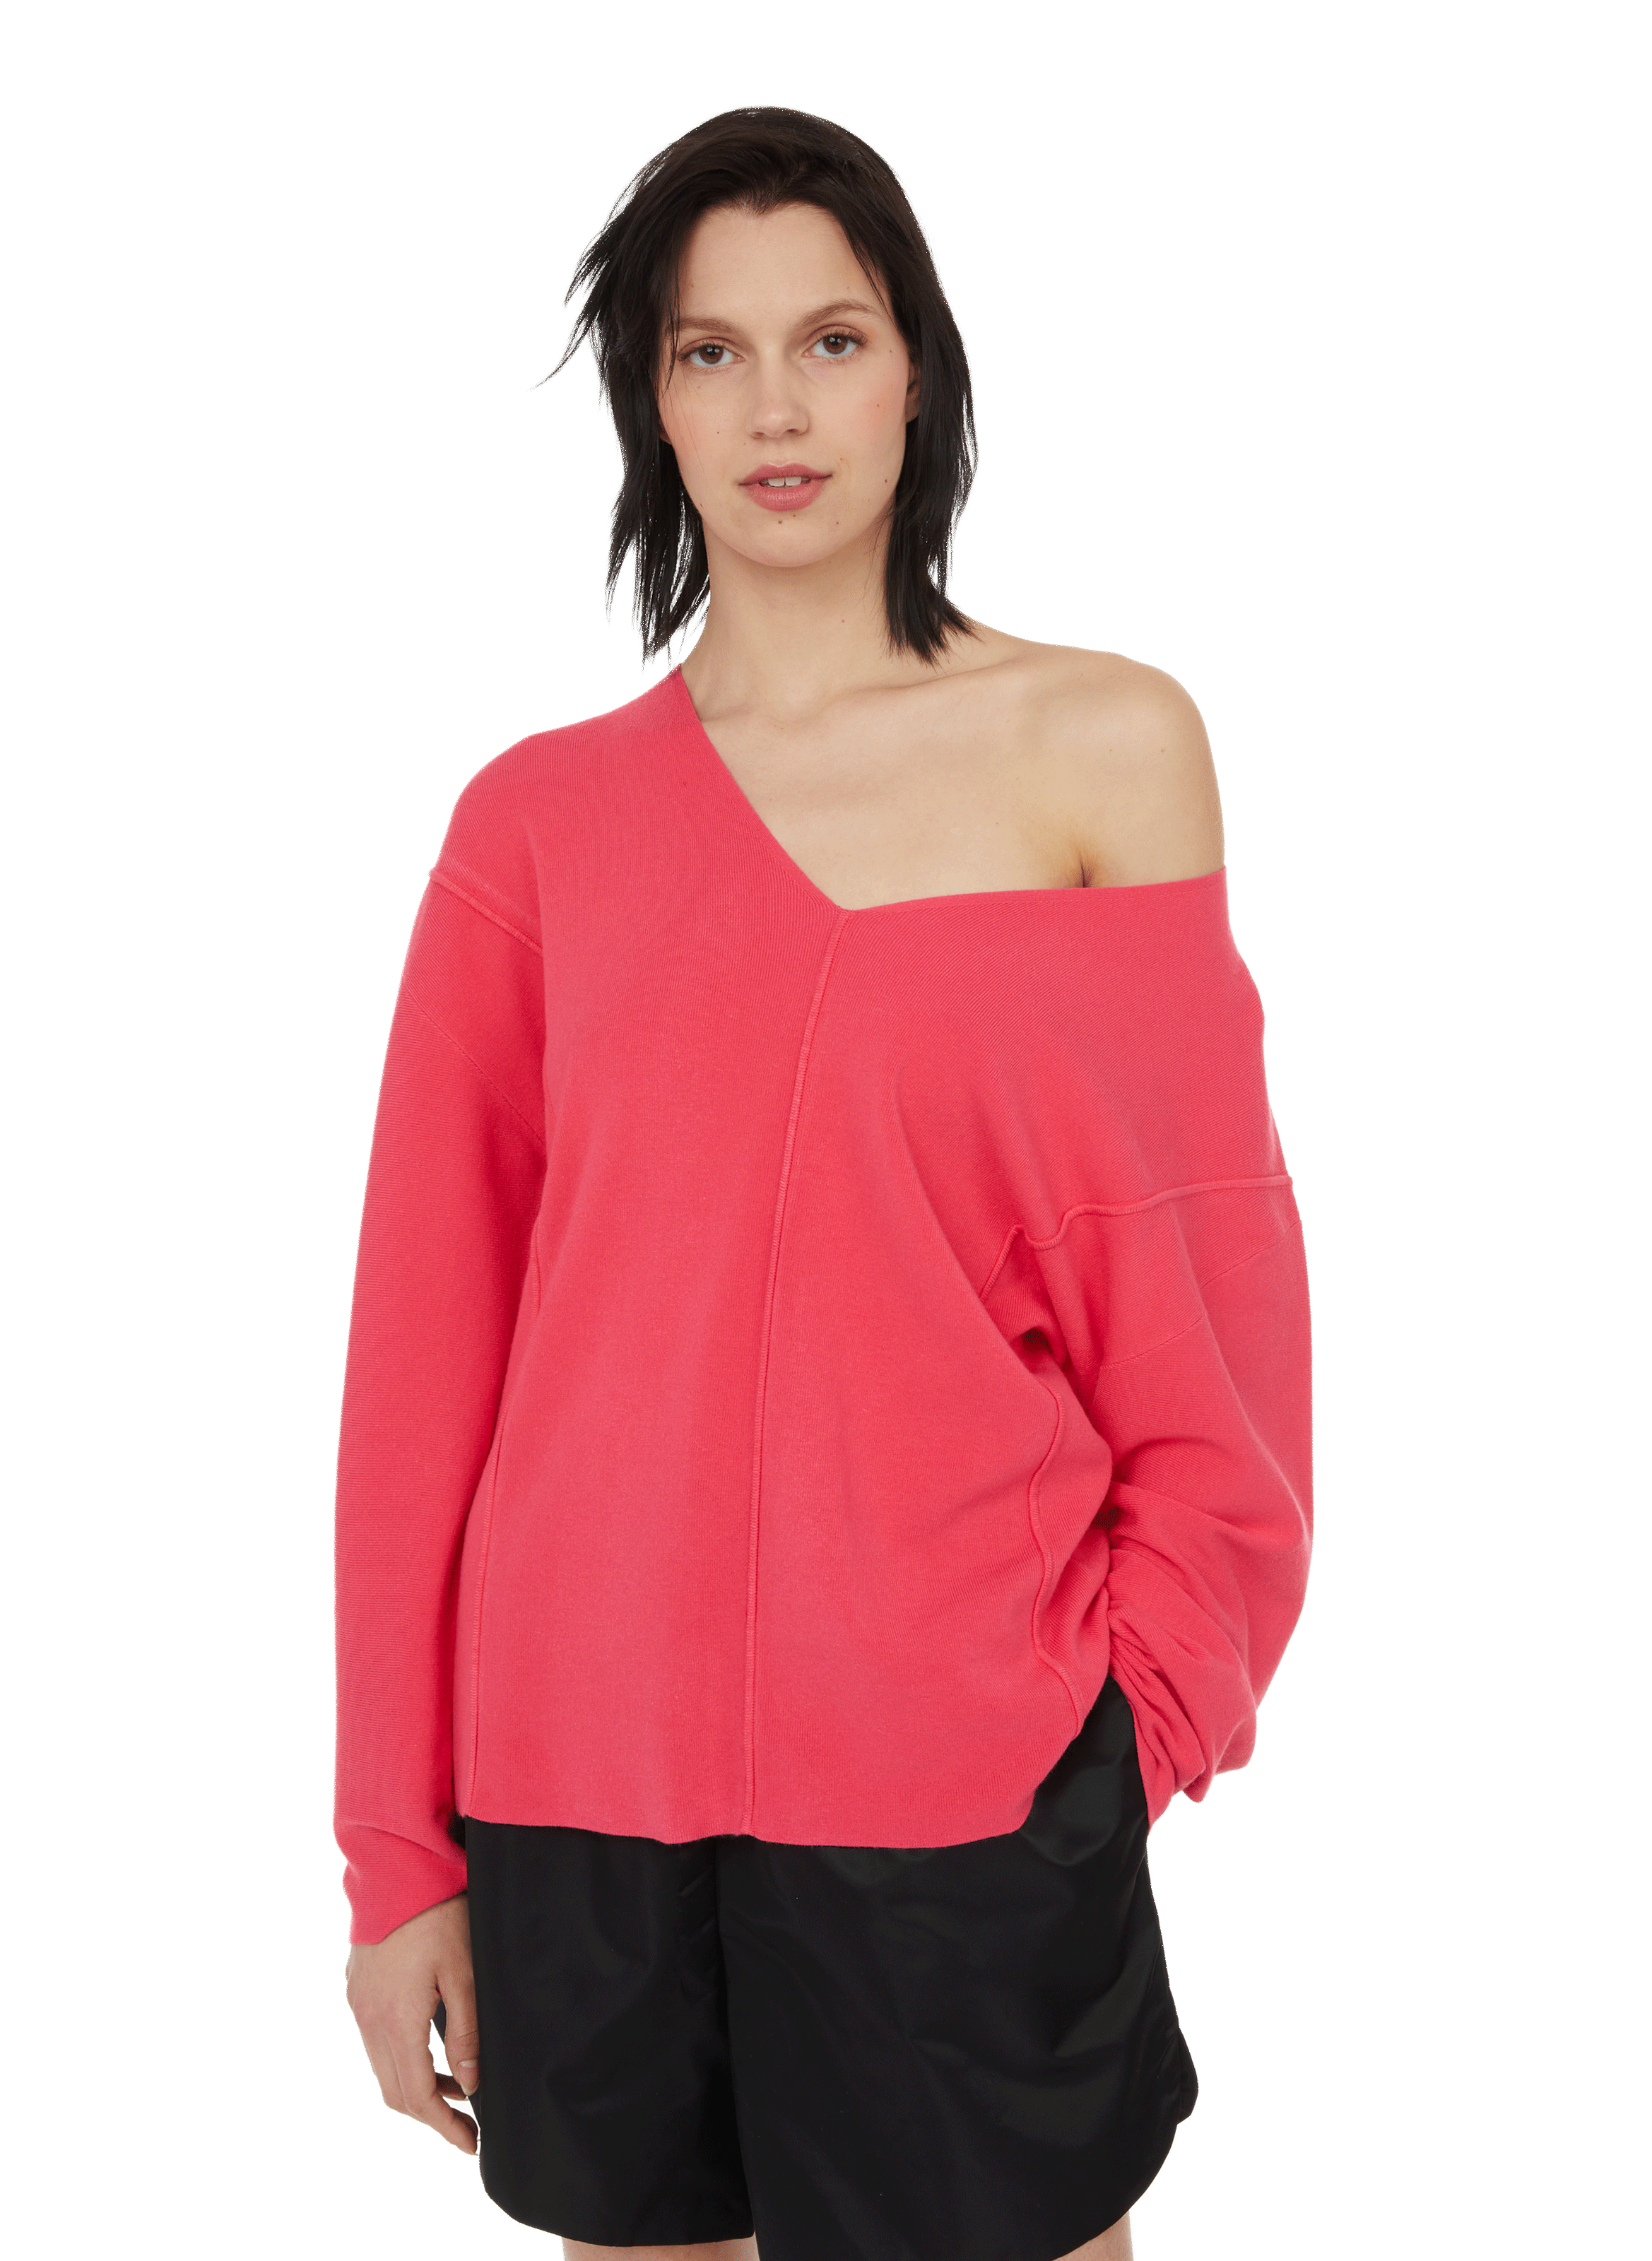 Helmut Lang Synthetic V-neck Sweater in Pink Womens Jumpers and knitwear Helmut Lang Jumpers and knitwear Save 50% 